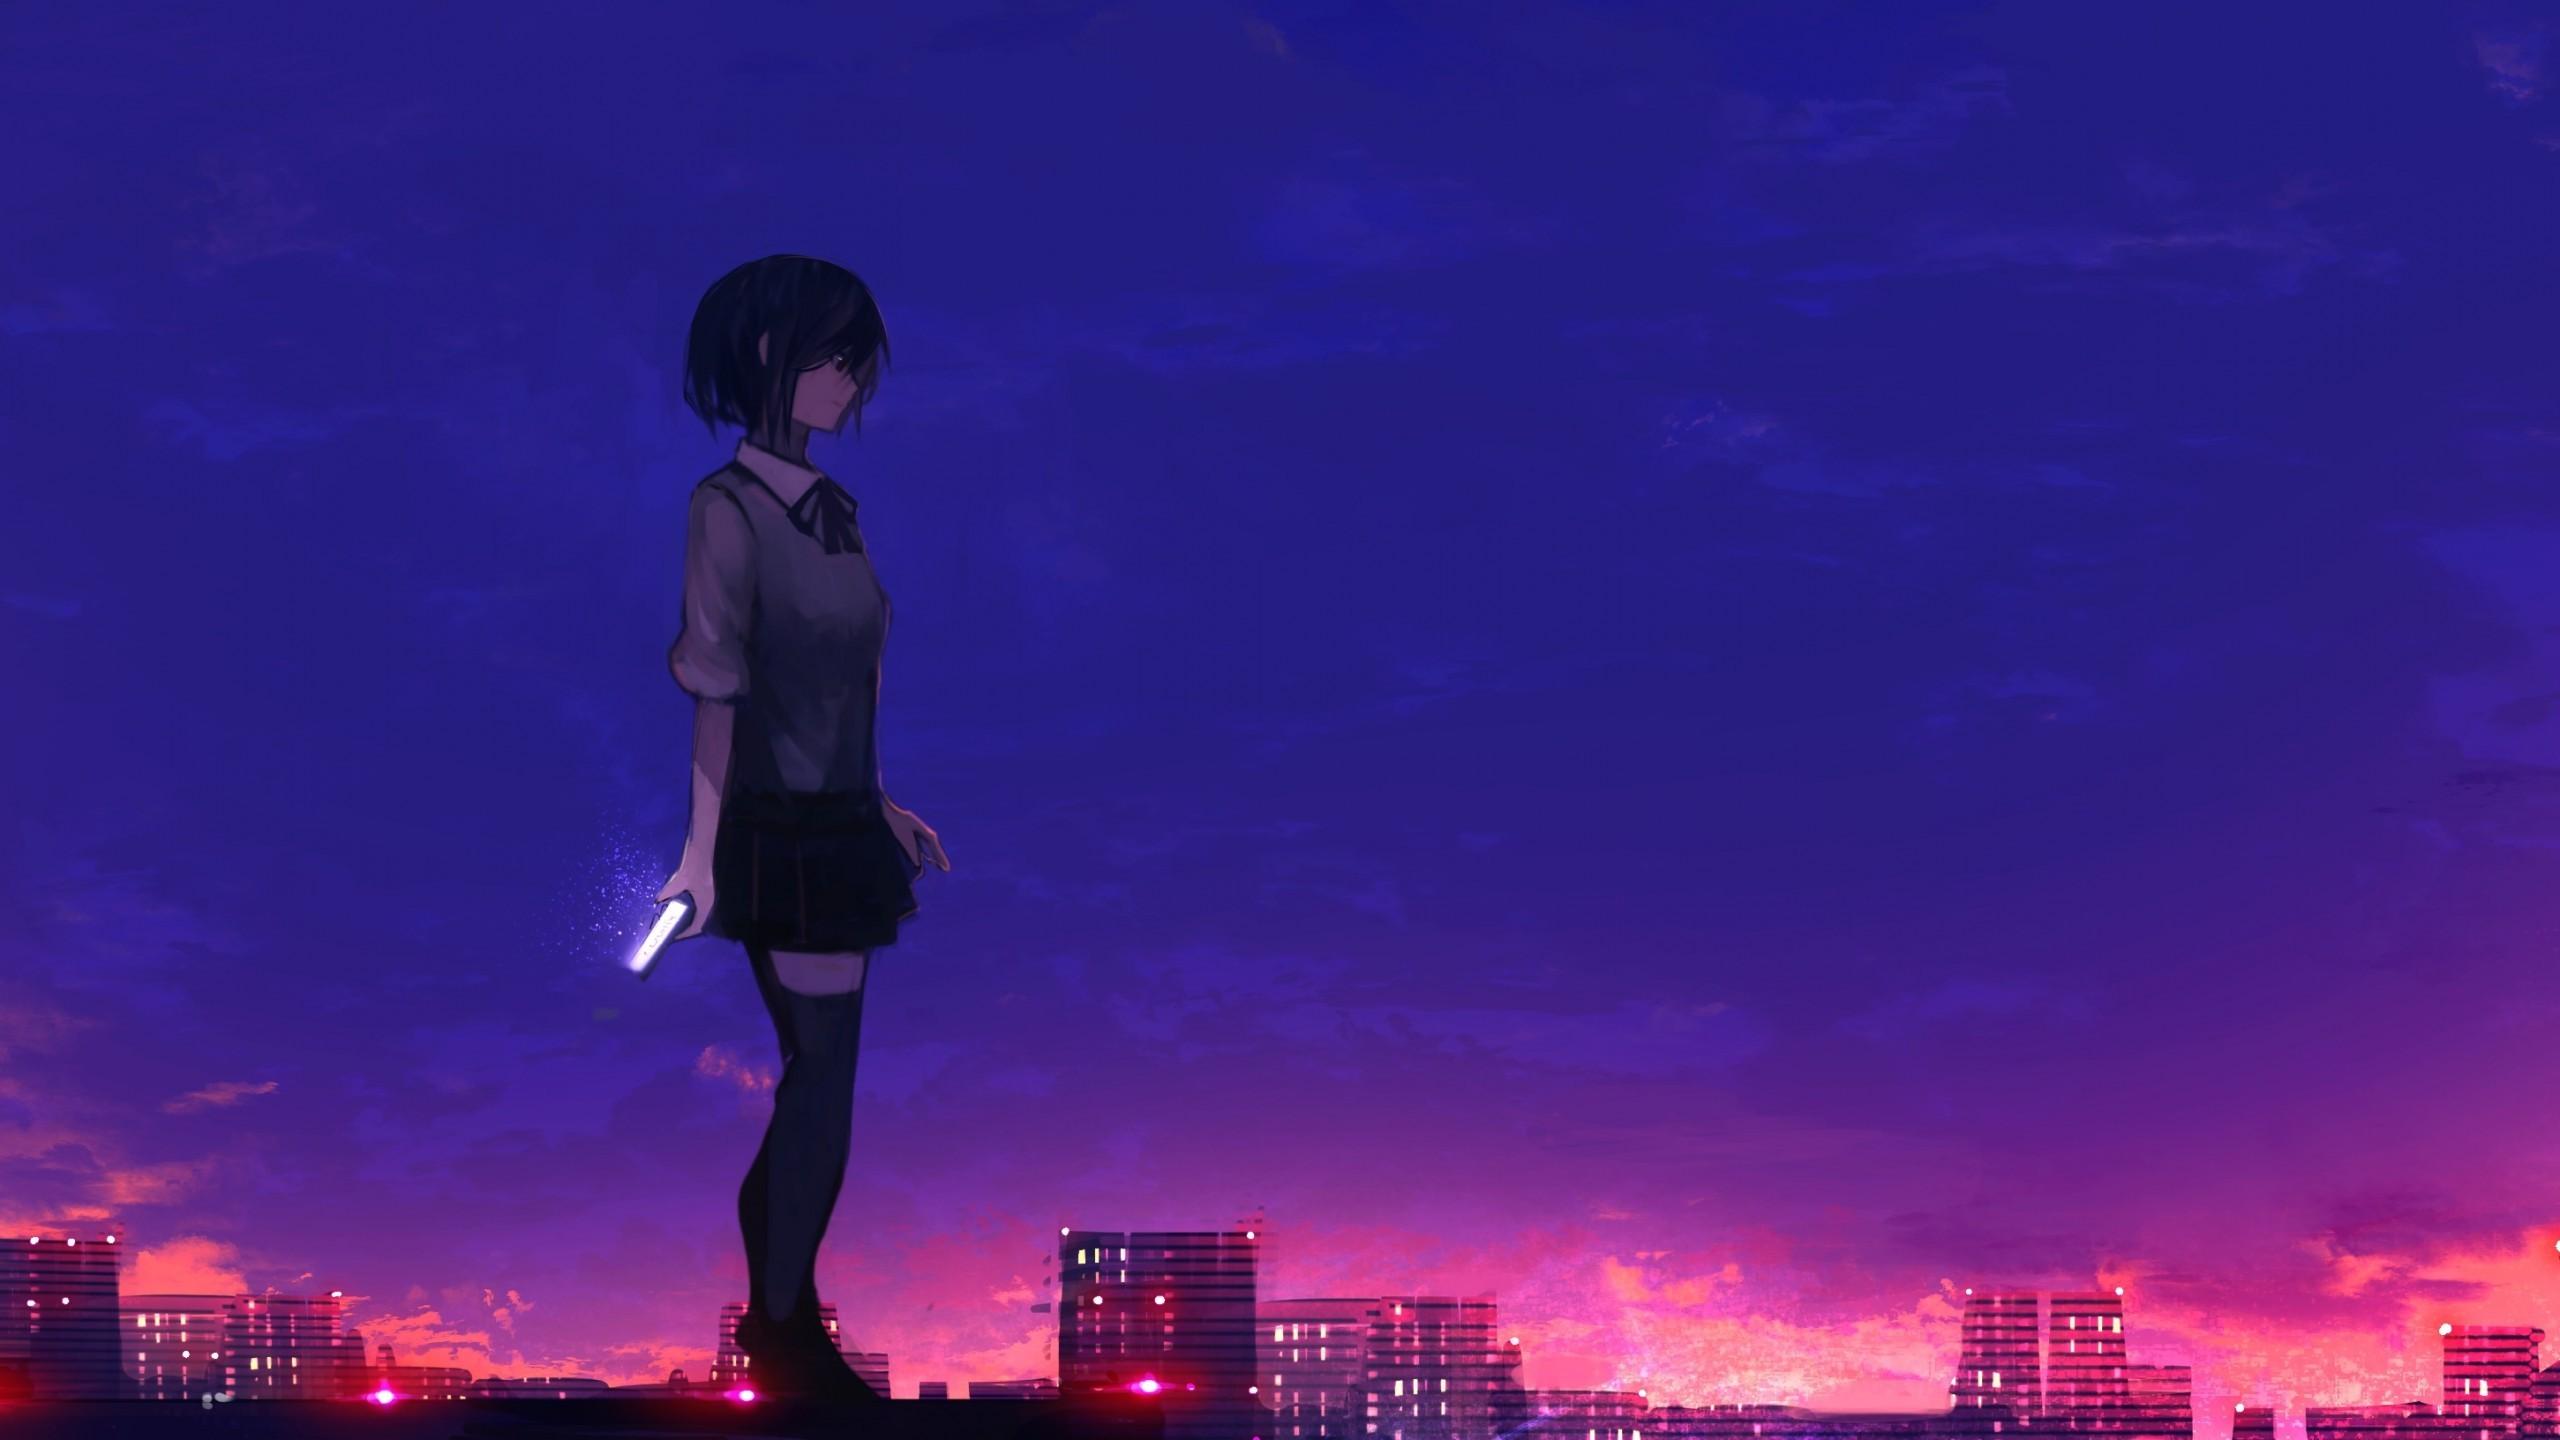 Download 2560x1440 Anime Girl, Rooftop, Buildings, Sunset, School Uniform, Scenic Wallpaper for iMac 27 inch